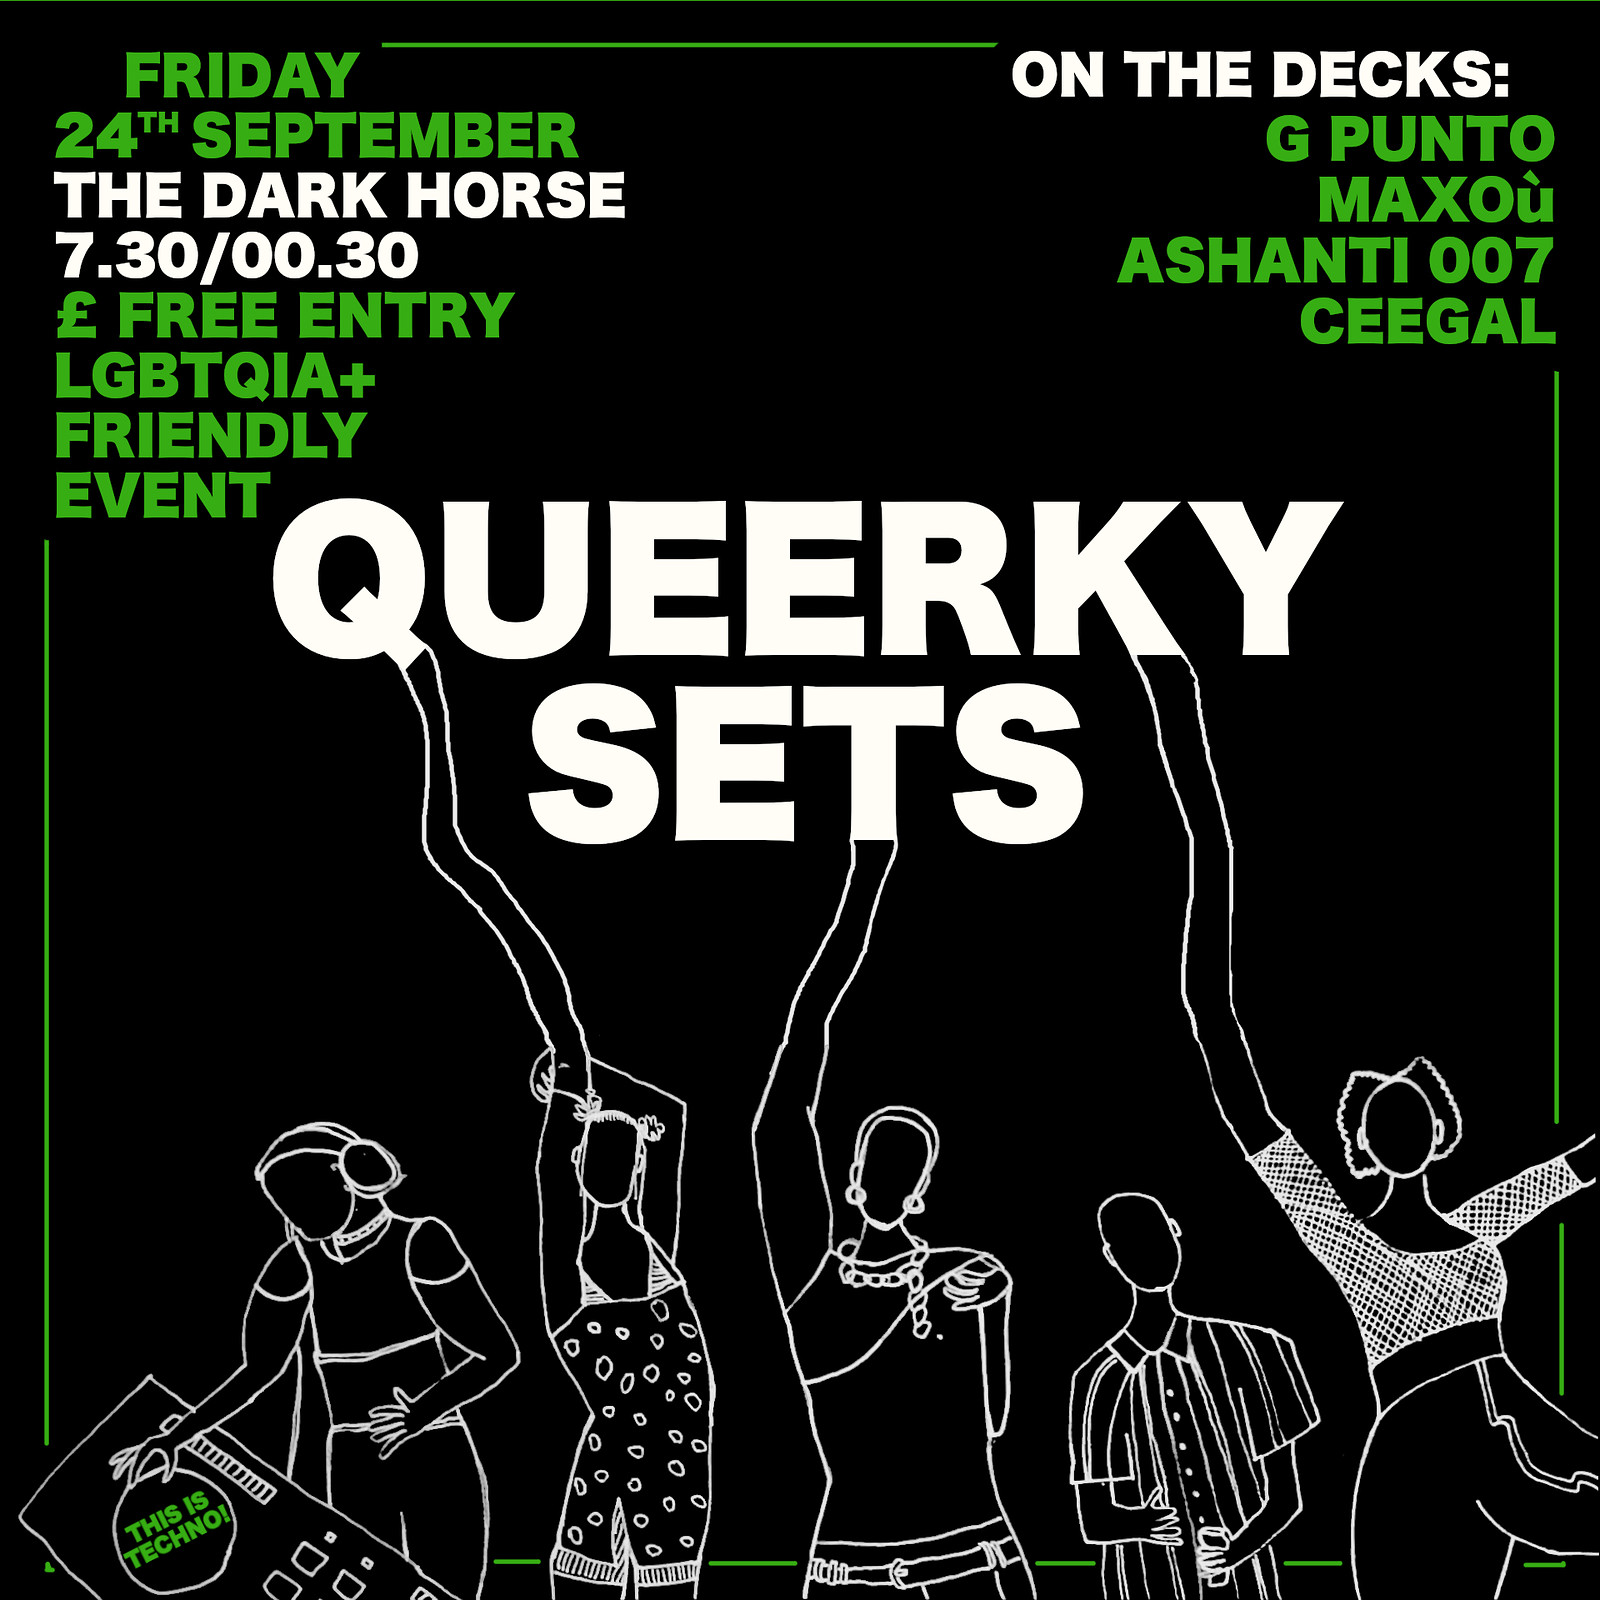 QUEERKY SET at The Dark Horse